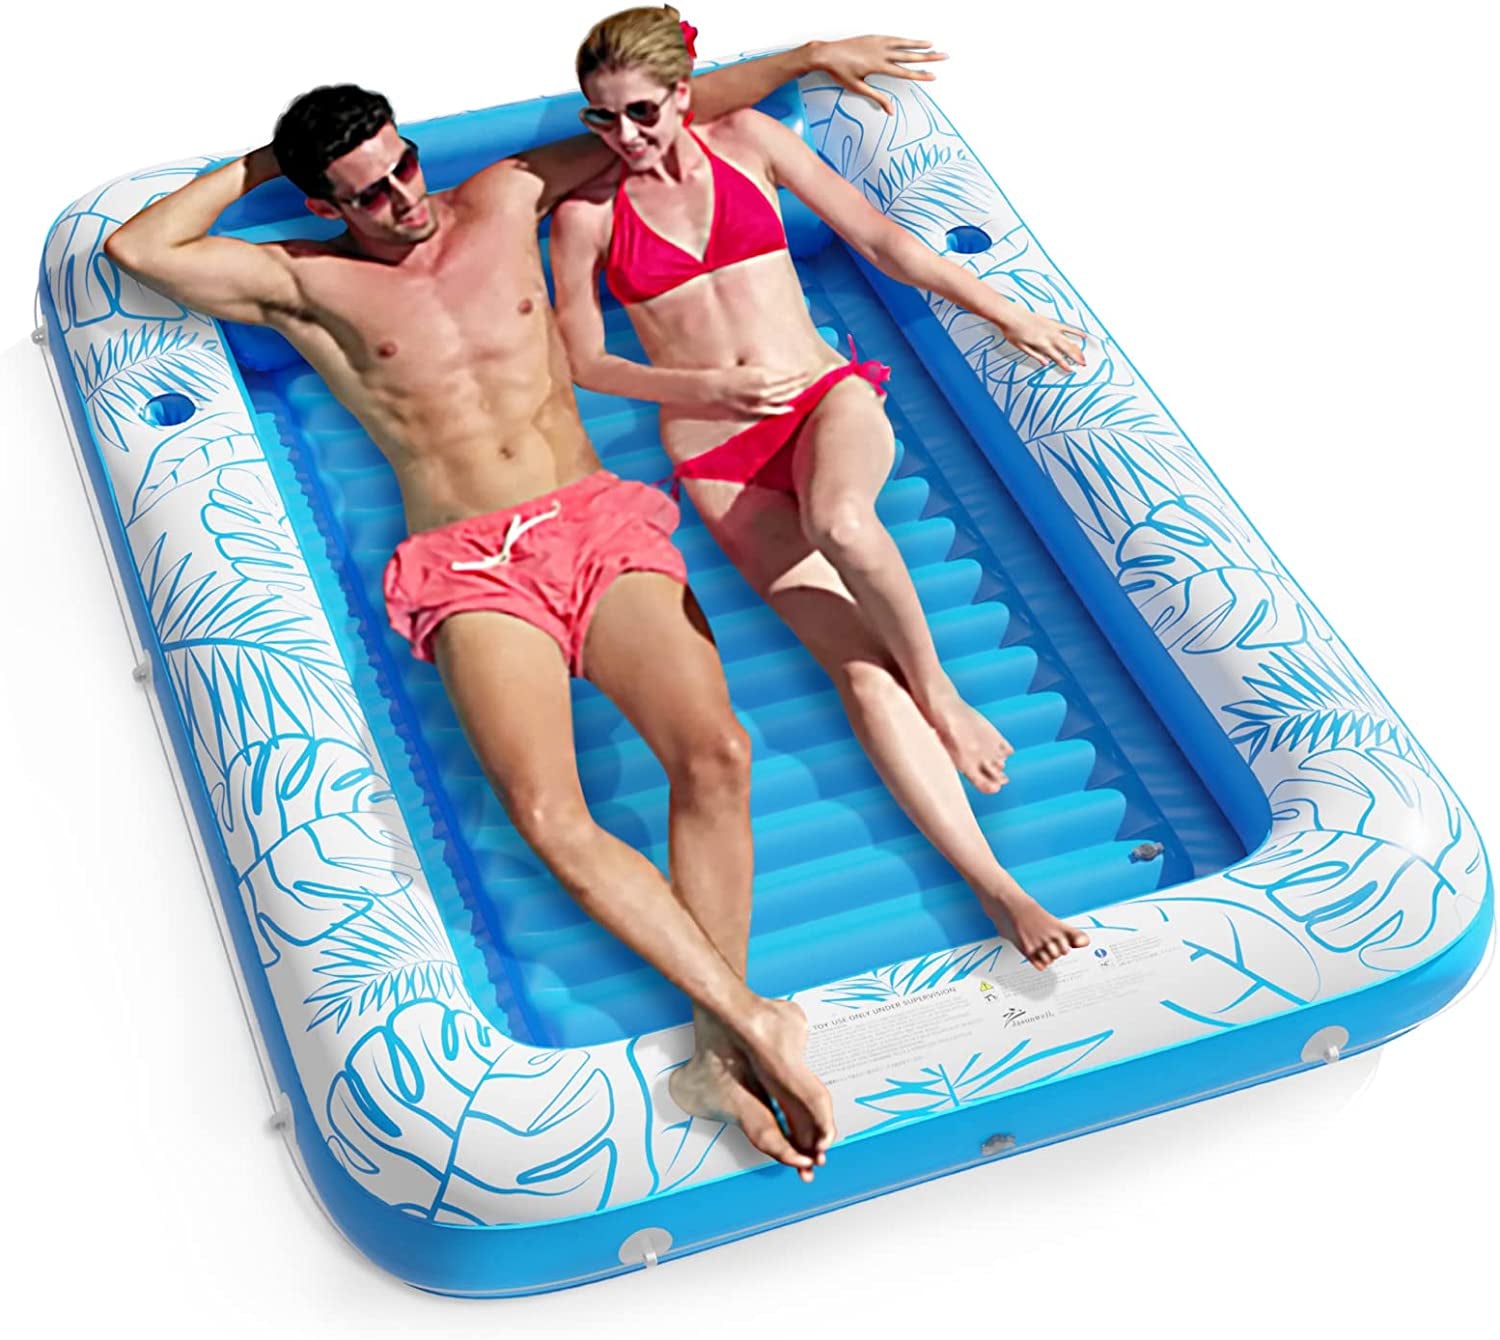 Inflatable Tanning Pool Lounger Float -  4 in 1 Sun Tan Tub Sunbathing Pool Lounge Raft Floatie Toys Water Filled Bed Mat Pad for Adult Blow up Kiddie Pool Kids Ball Pit Pool (L)